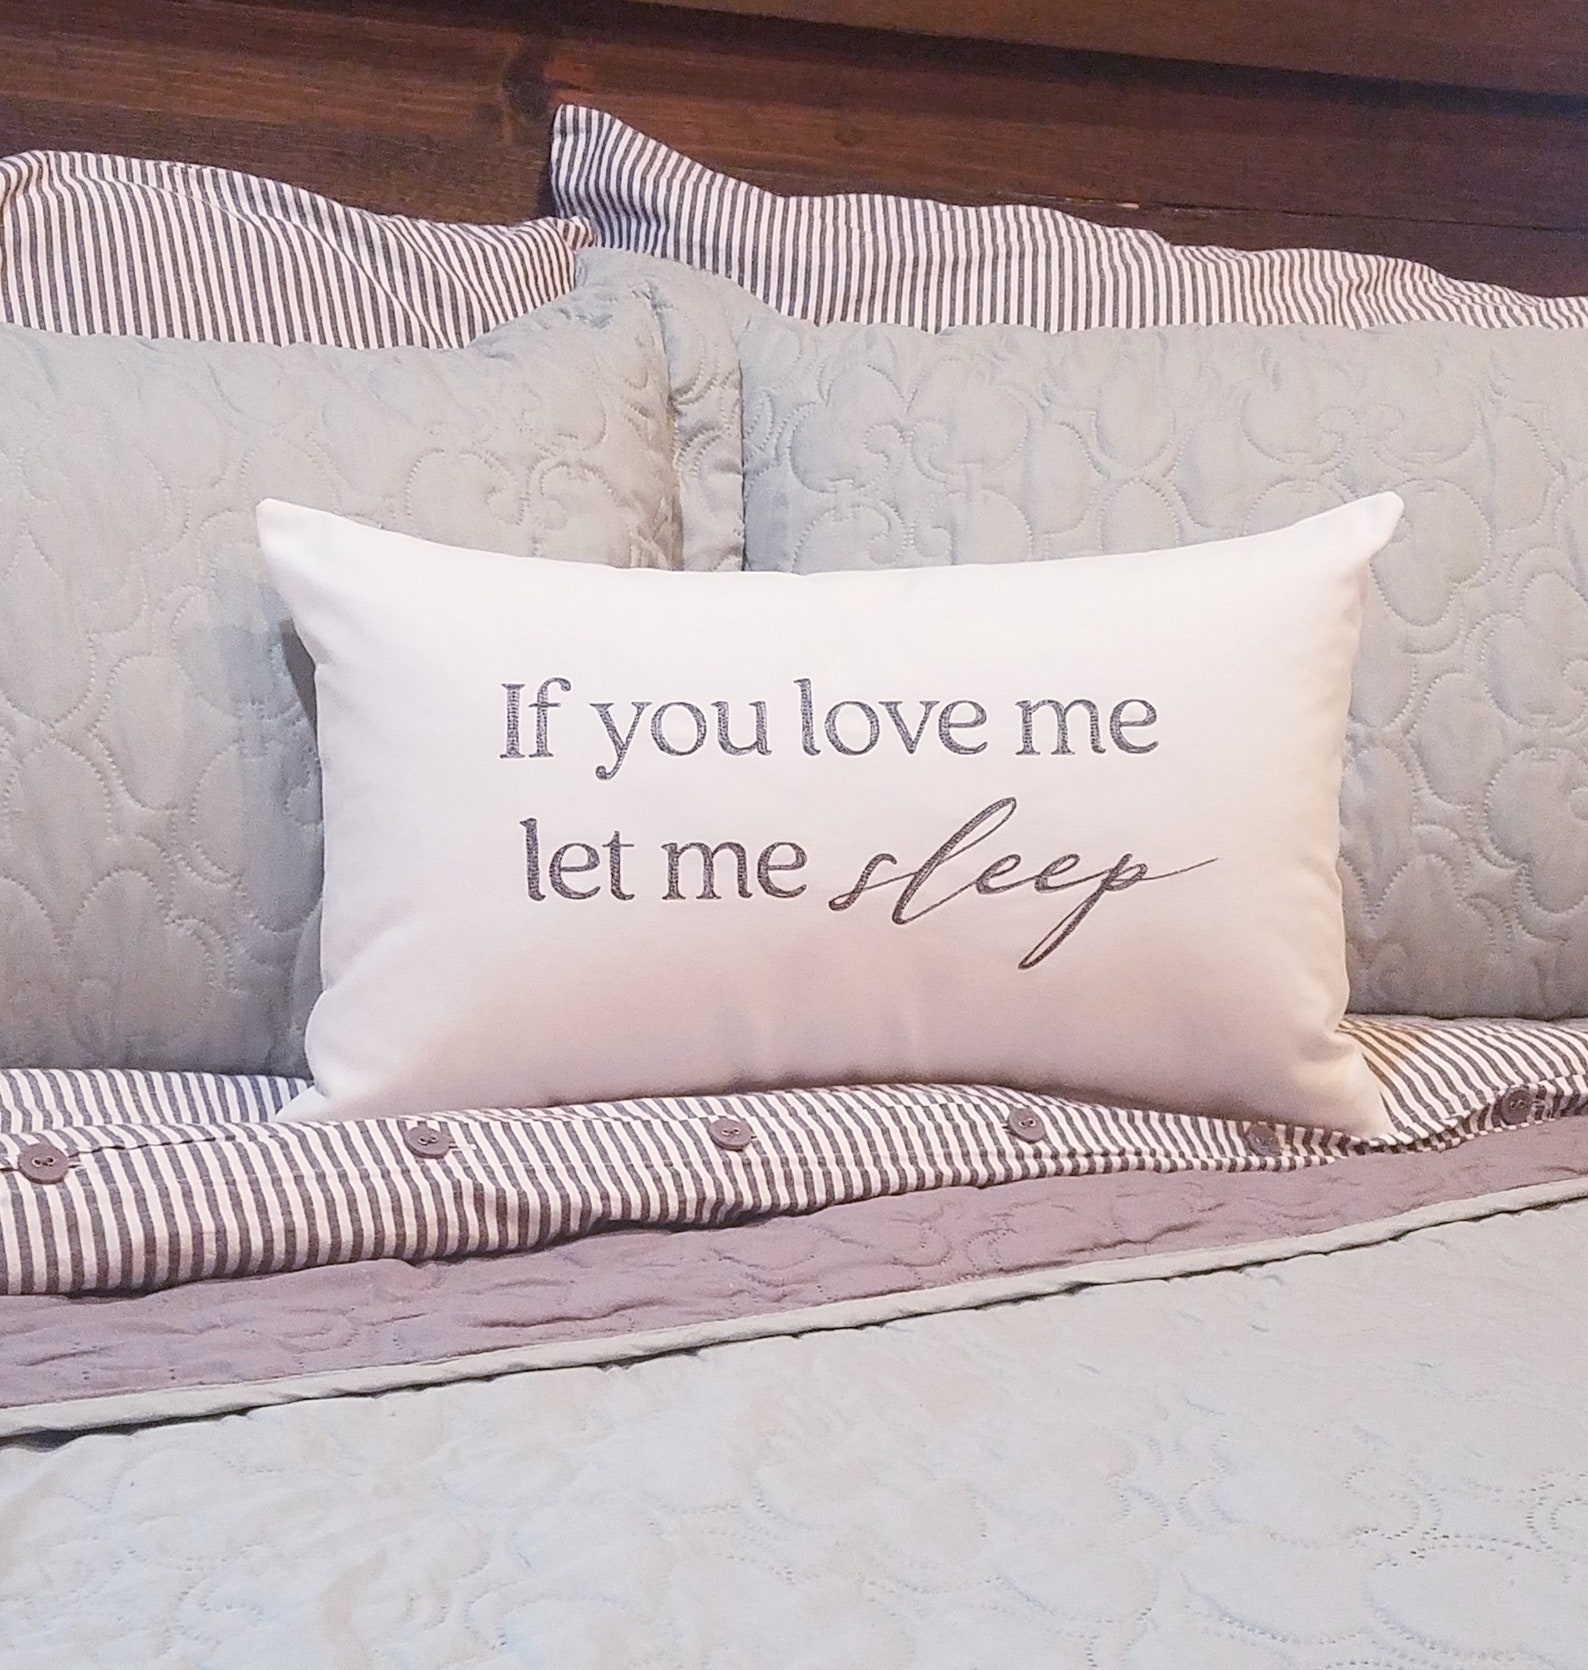 If You Love Me Let Me Sleep If You Love Me Bedroom Pillows - Etsy